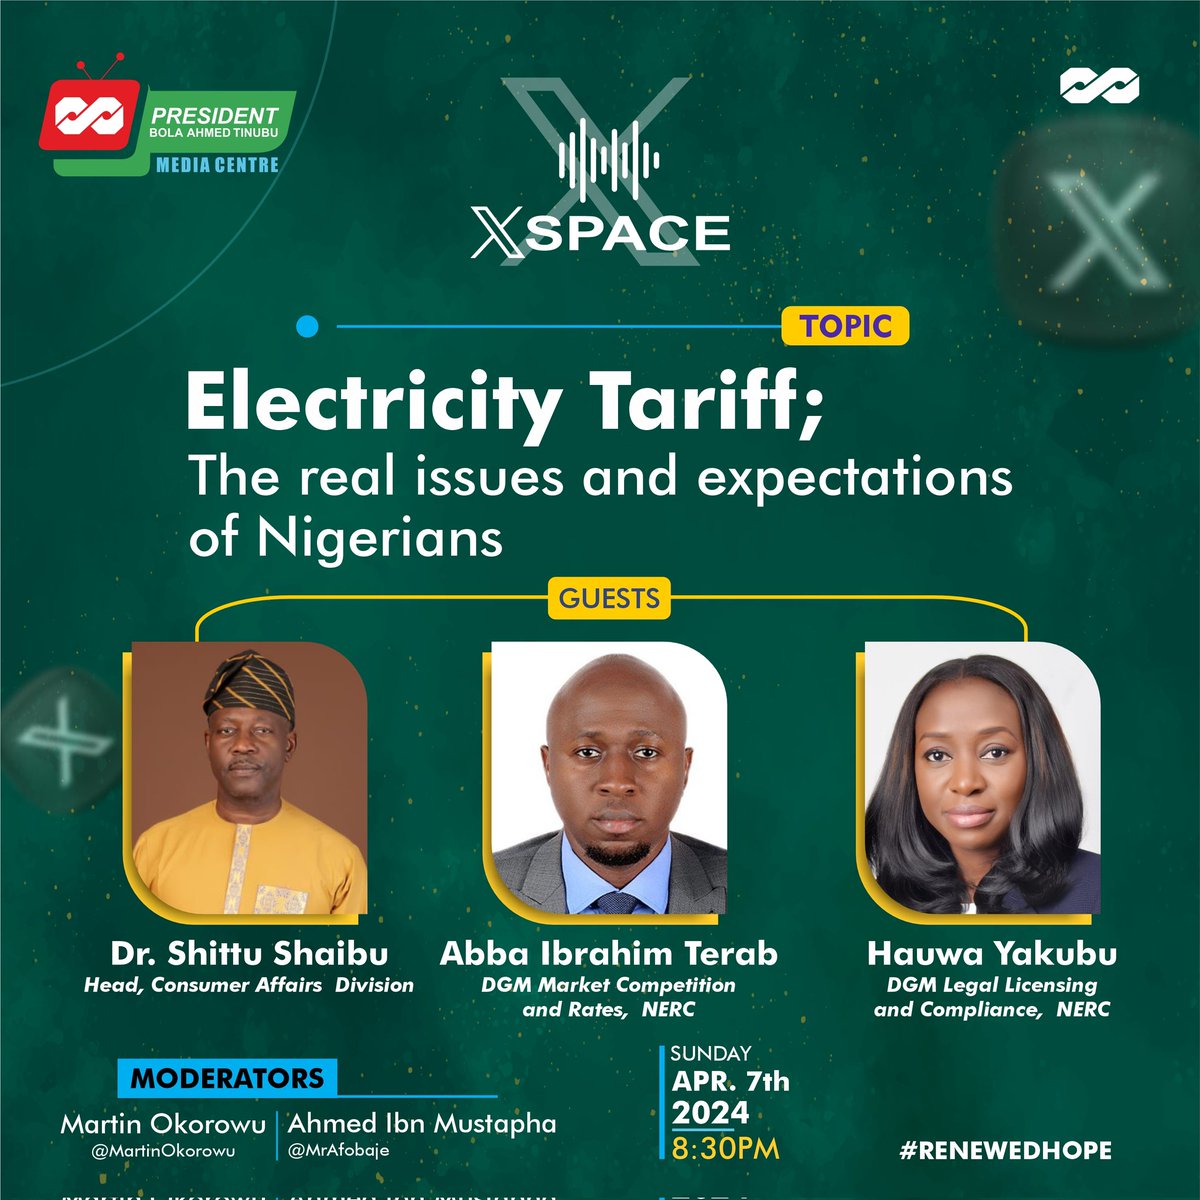 Join us on this week's edition of #PBATSpaces as we delve into the real issues and expectations surrounding electricity tariffs in Nigeria. Moderators: @MrAfobaje || @martinokorowu 🕣: 8:30pm Stay tuned!